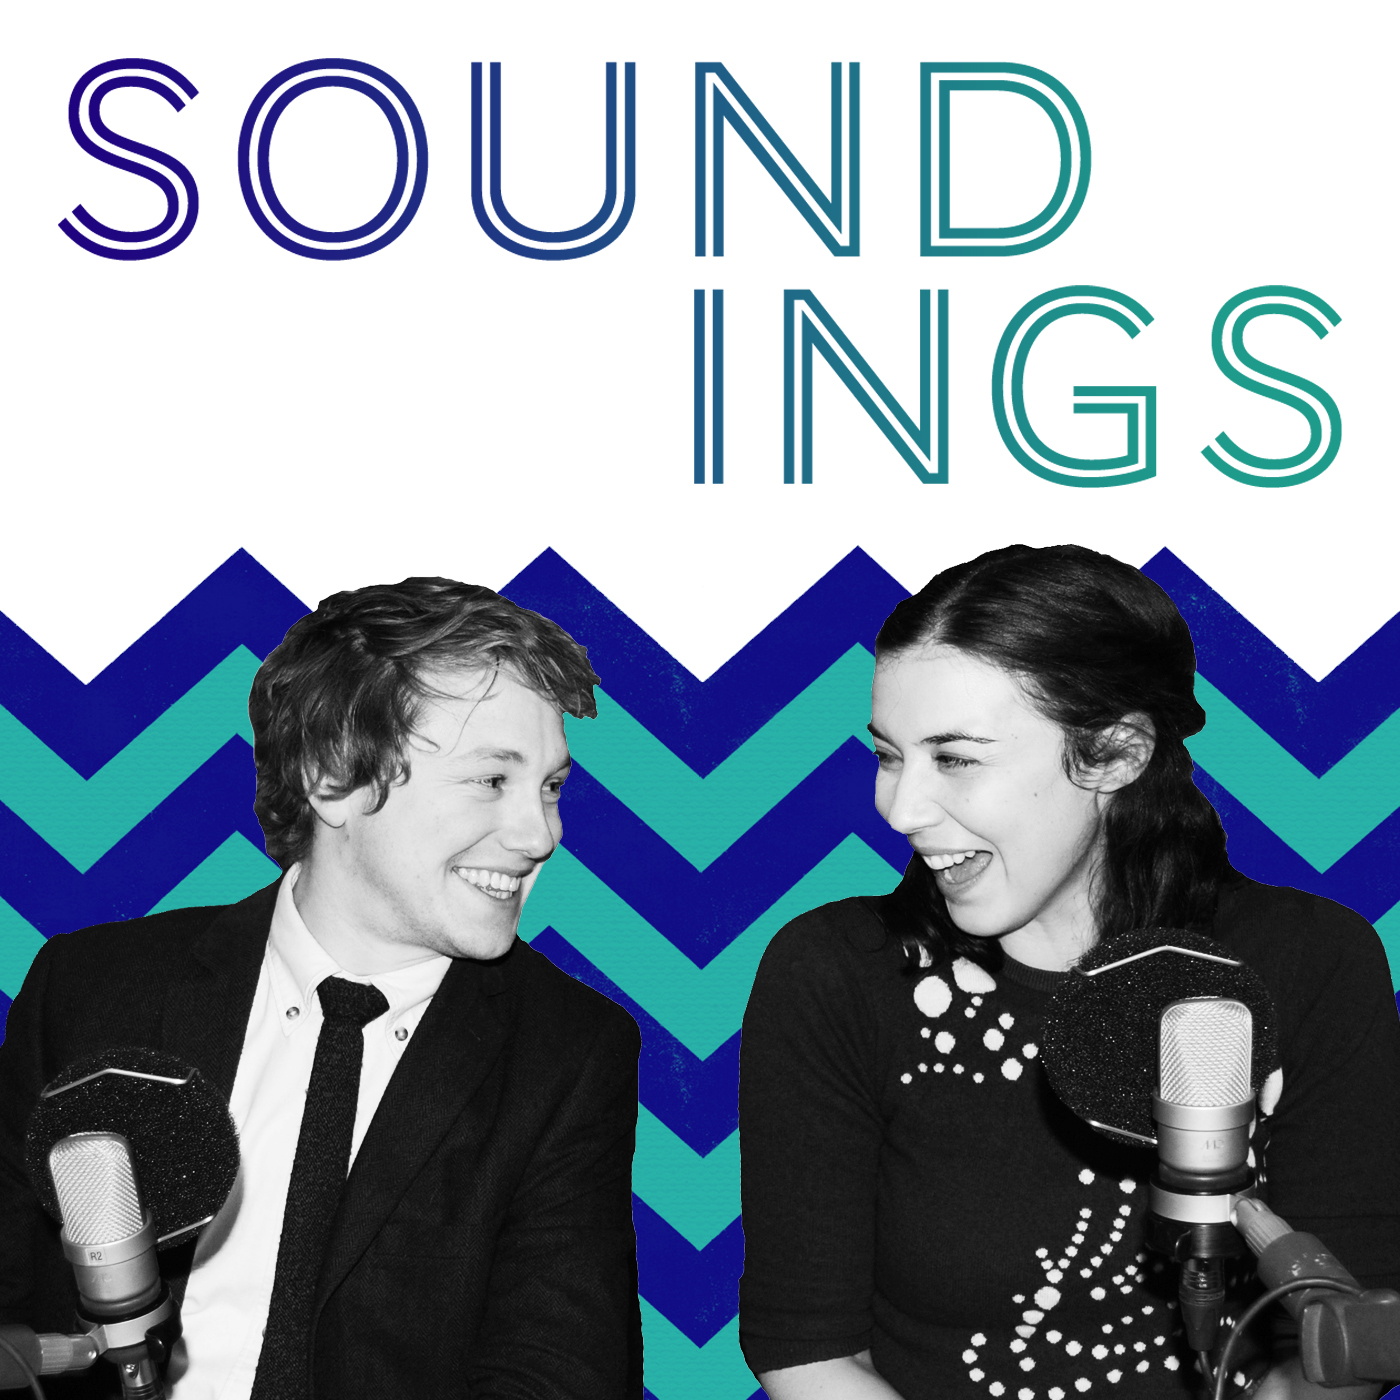 Soundings S1 E11: Wes Anderson, John Cleese, Ghost Stories, St Vincent & The Gloaming